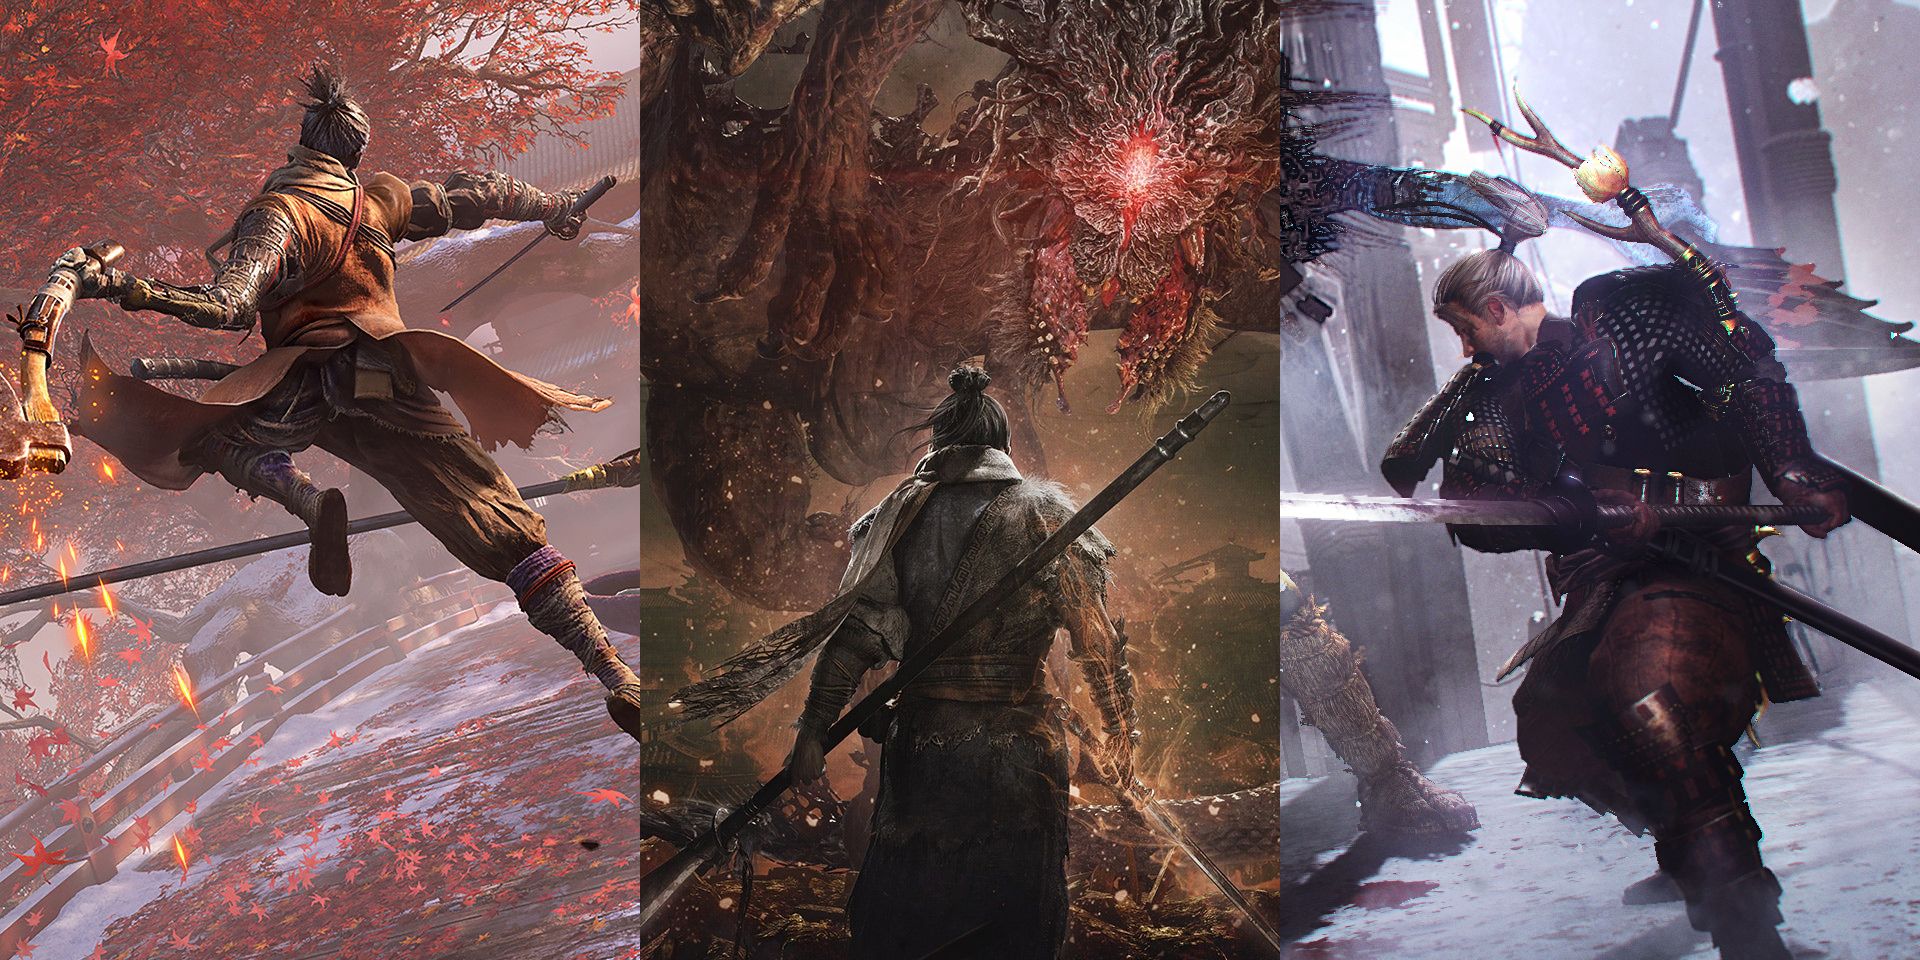 A collage incorporating images of the respective protagonists of Sekiro: Shadows Die Twice, Wo Long: Fallen Dynasty, and Nioh in battle.